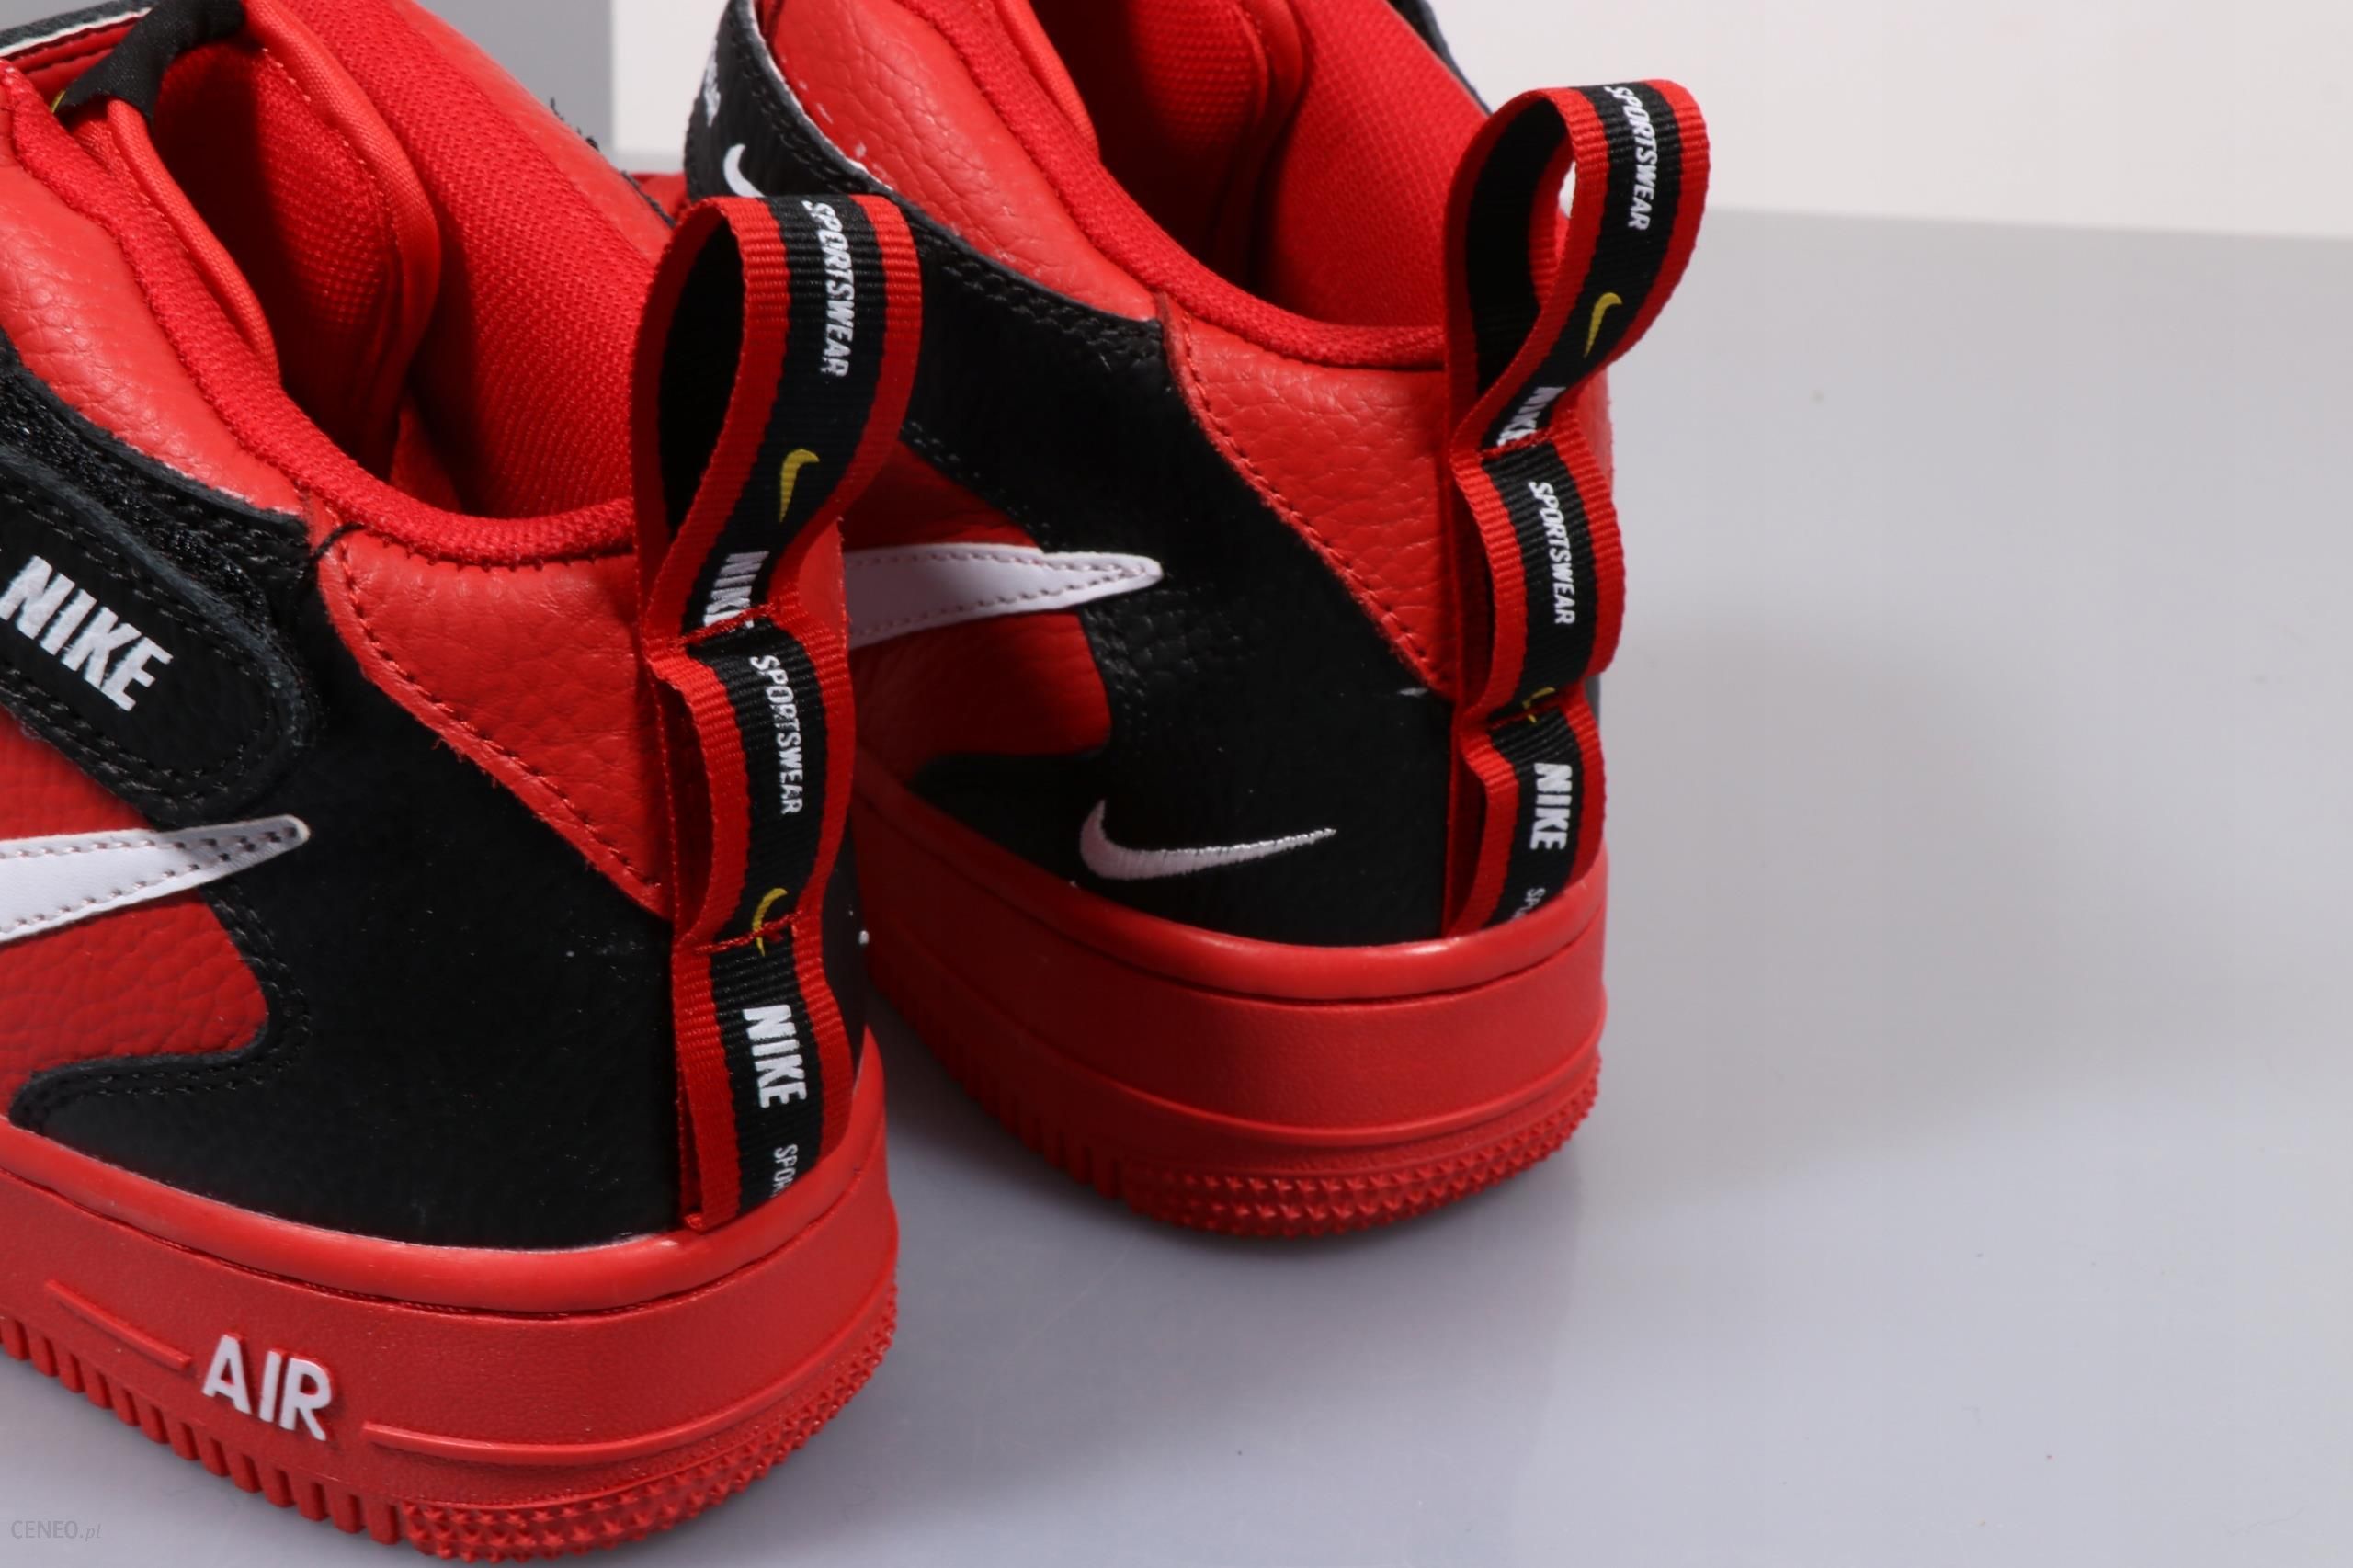 Buy Air Force 1 Mid '07 LV8 'Overbranding' - 804609 605 - Red, GOAT